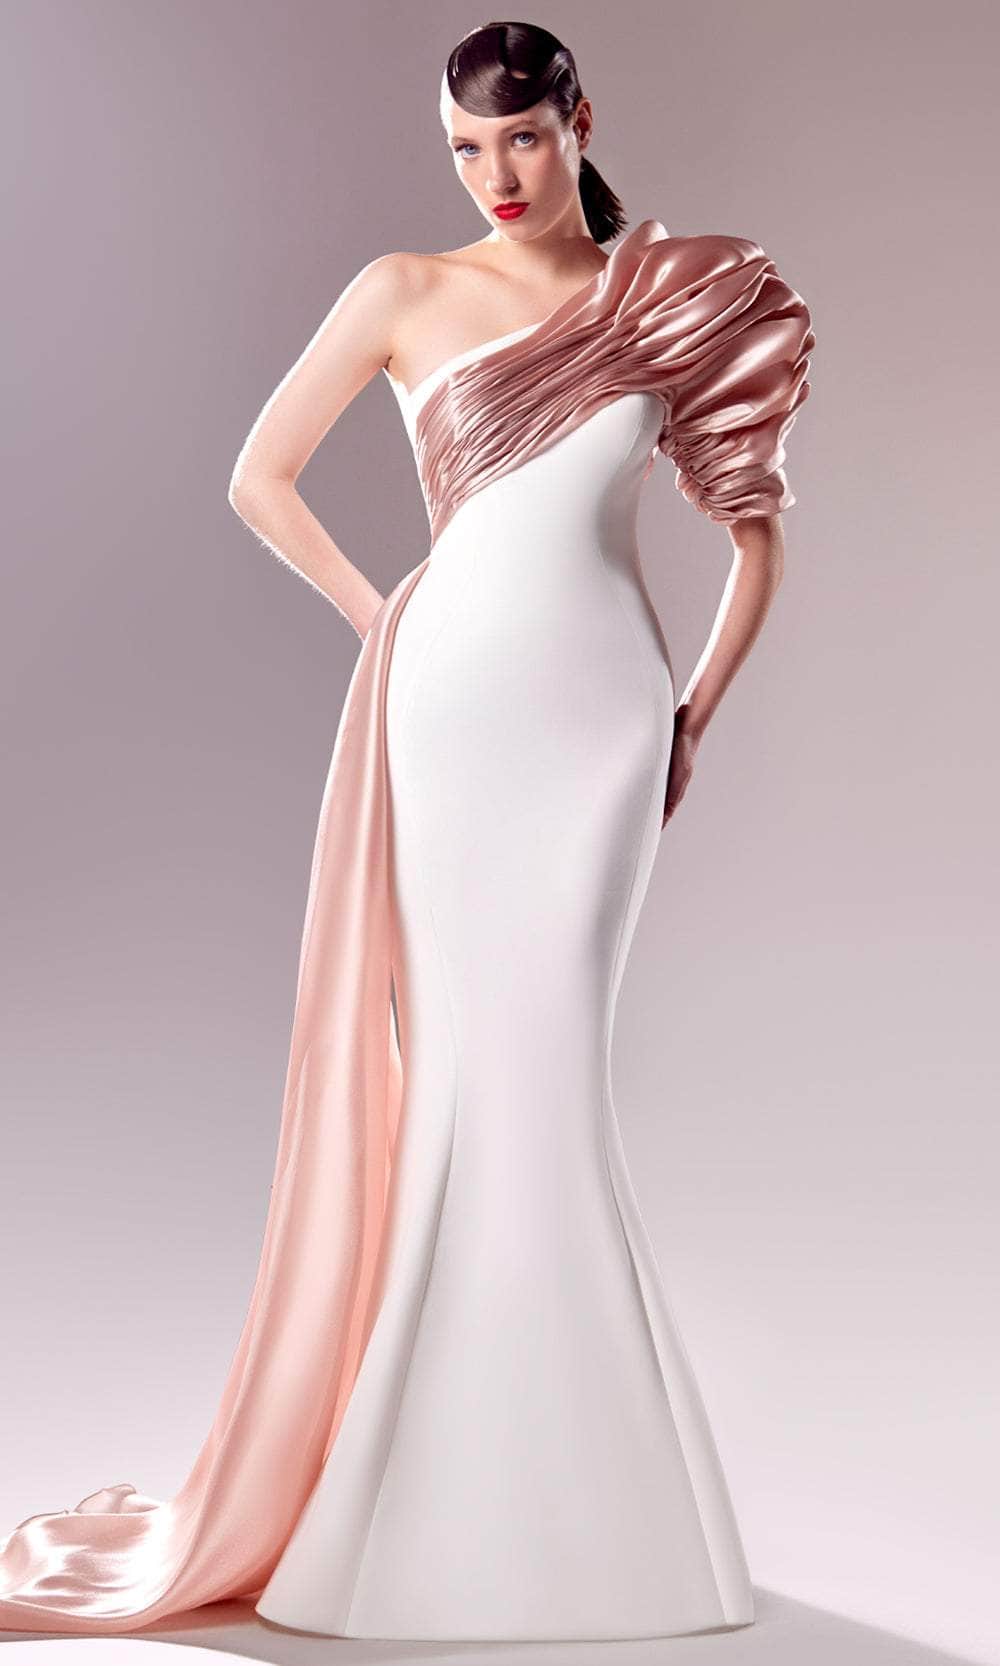 Image of MNM Couture G1633 - Puffed One-Shoulder Sleeve Crepe Gown